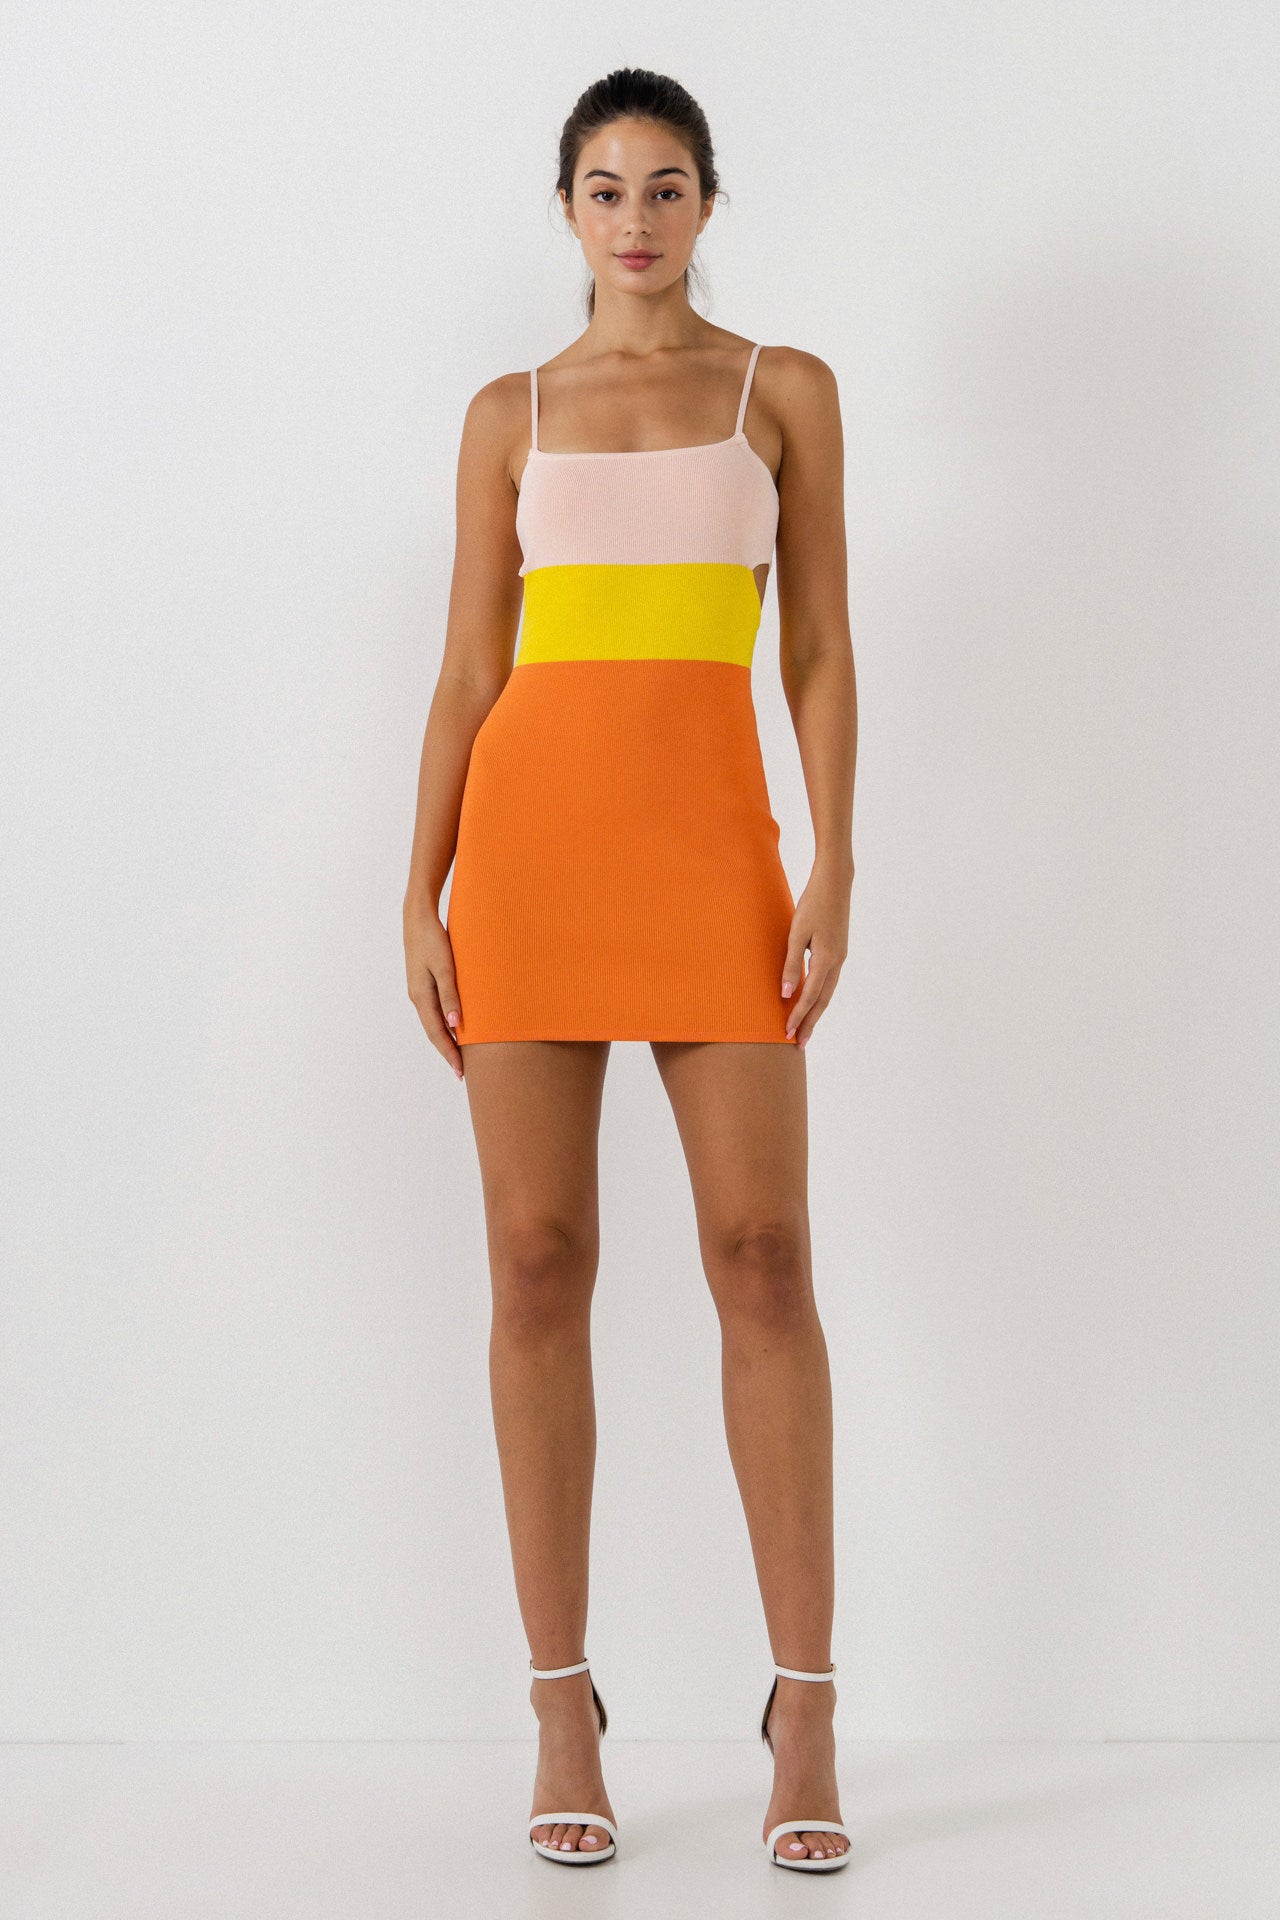 ENDLESS ROSE - Color Block Cut Out Mini Dress - DRESSES available at Objectrare